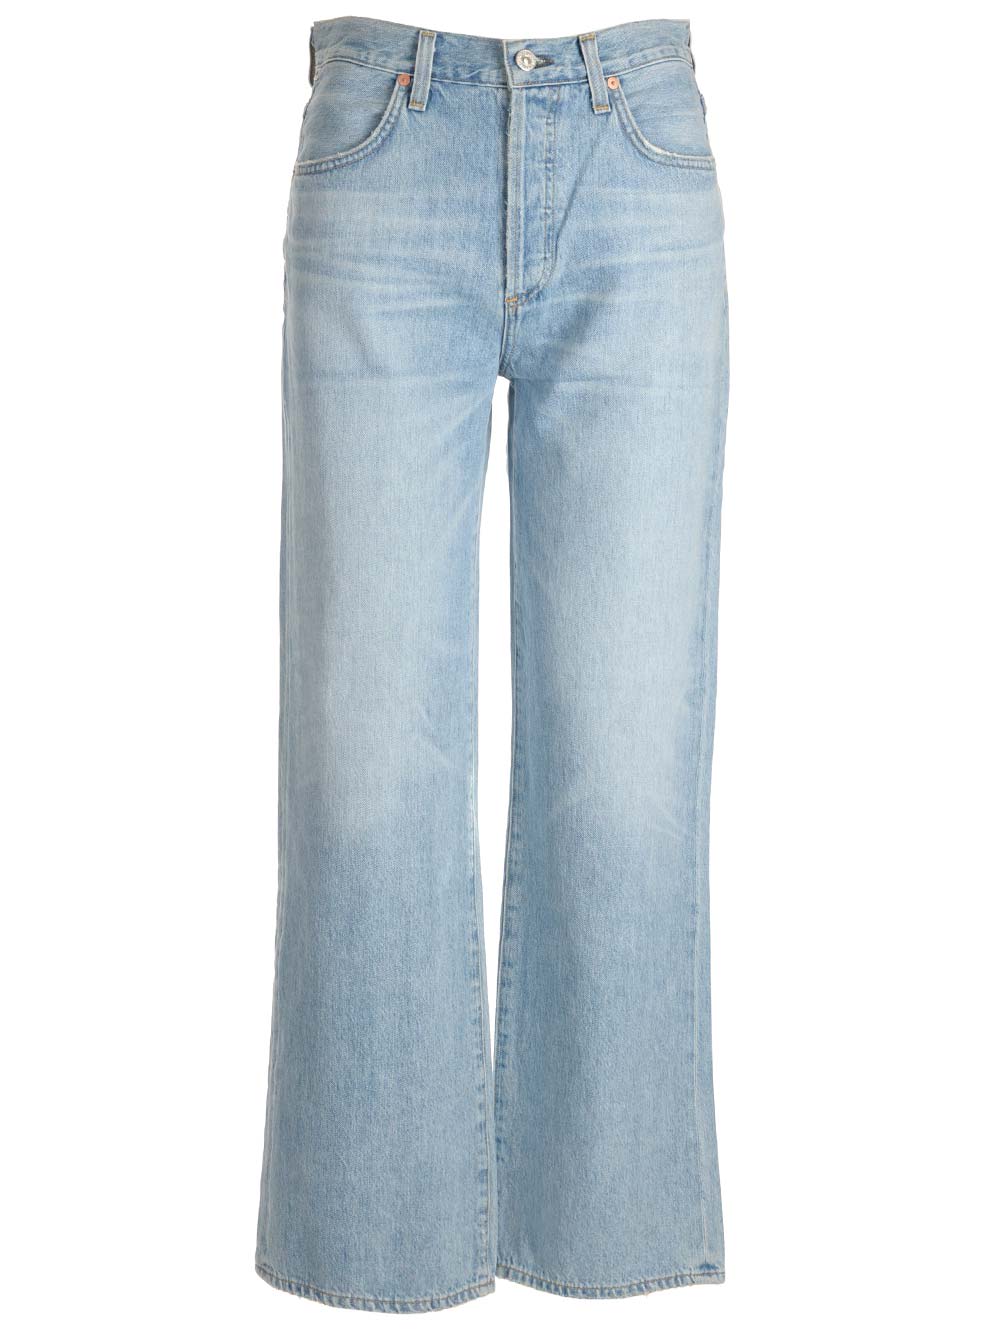 CITIZENS OF HUMANITY DENIM JEANS ANNINA